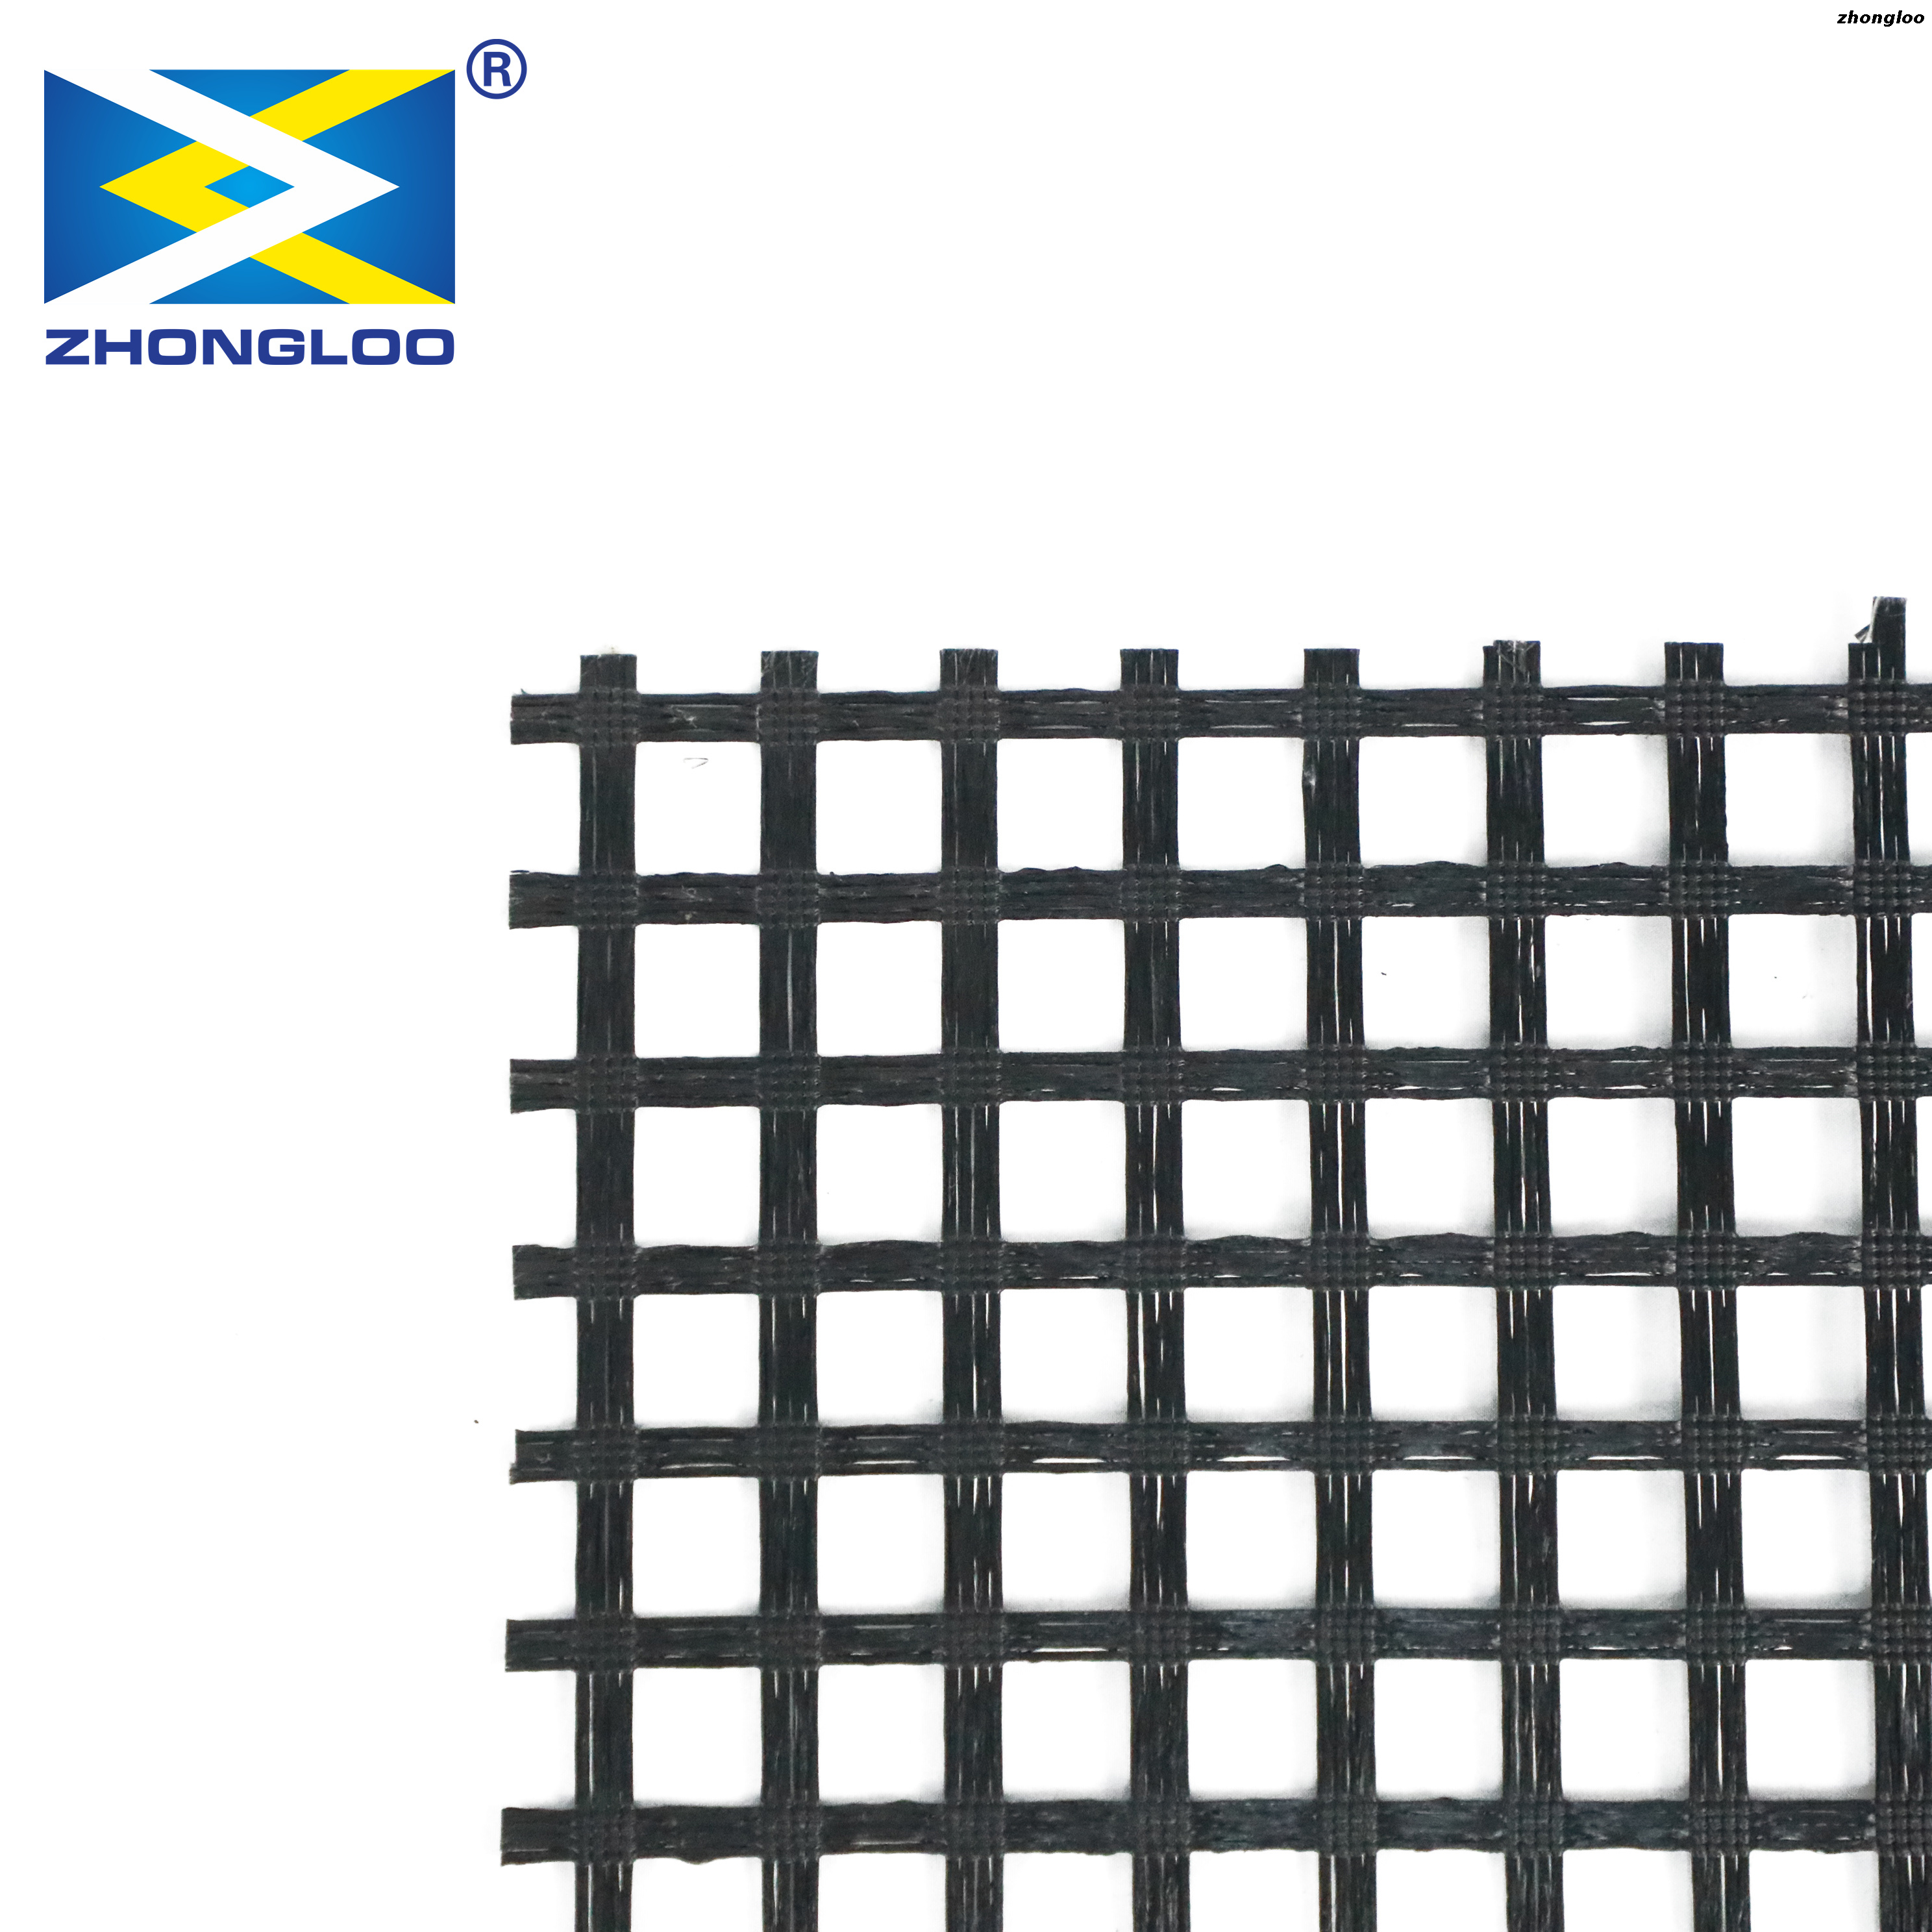 Warp-knitted Polyester Geogrid Used for Embankment Slope Reinforcement